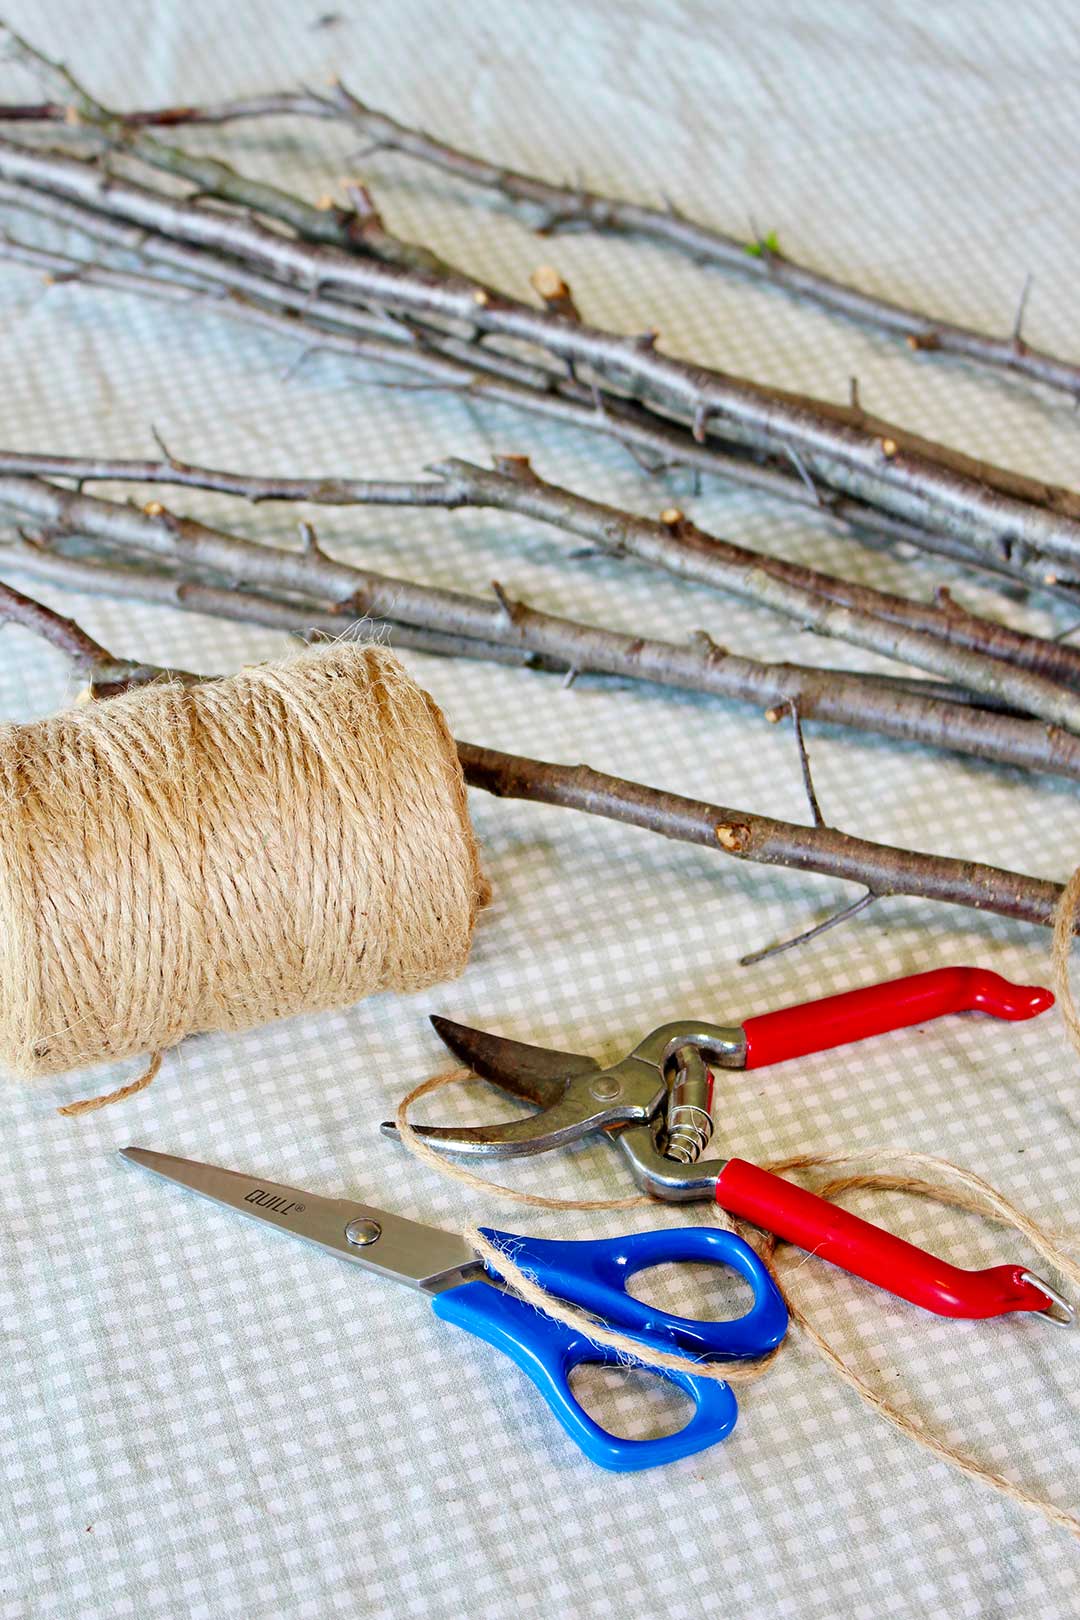 Supplies for a tabletop easel from twigs. Twine, blue scissors, gardening shears and twigs lay on a piece of checkered fabric.